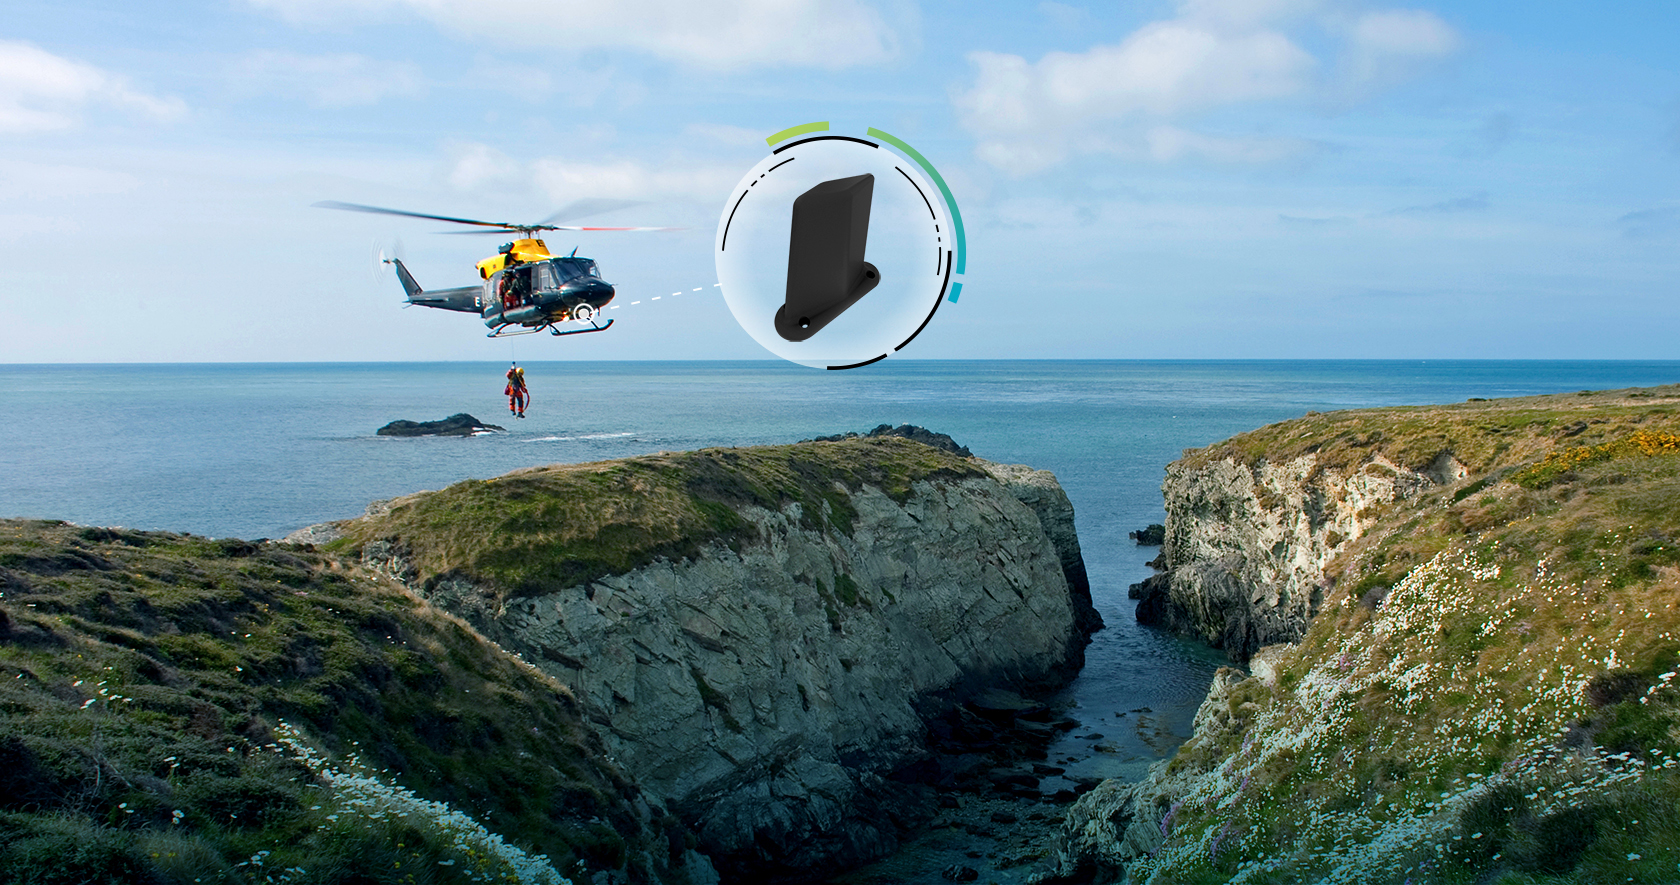 Search and rescue helicopter over a cliff with an Antcom 5B antenna